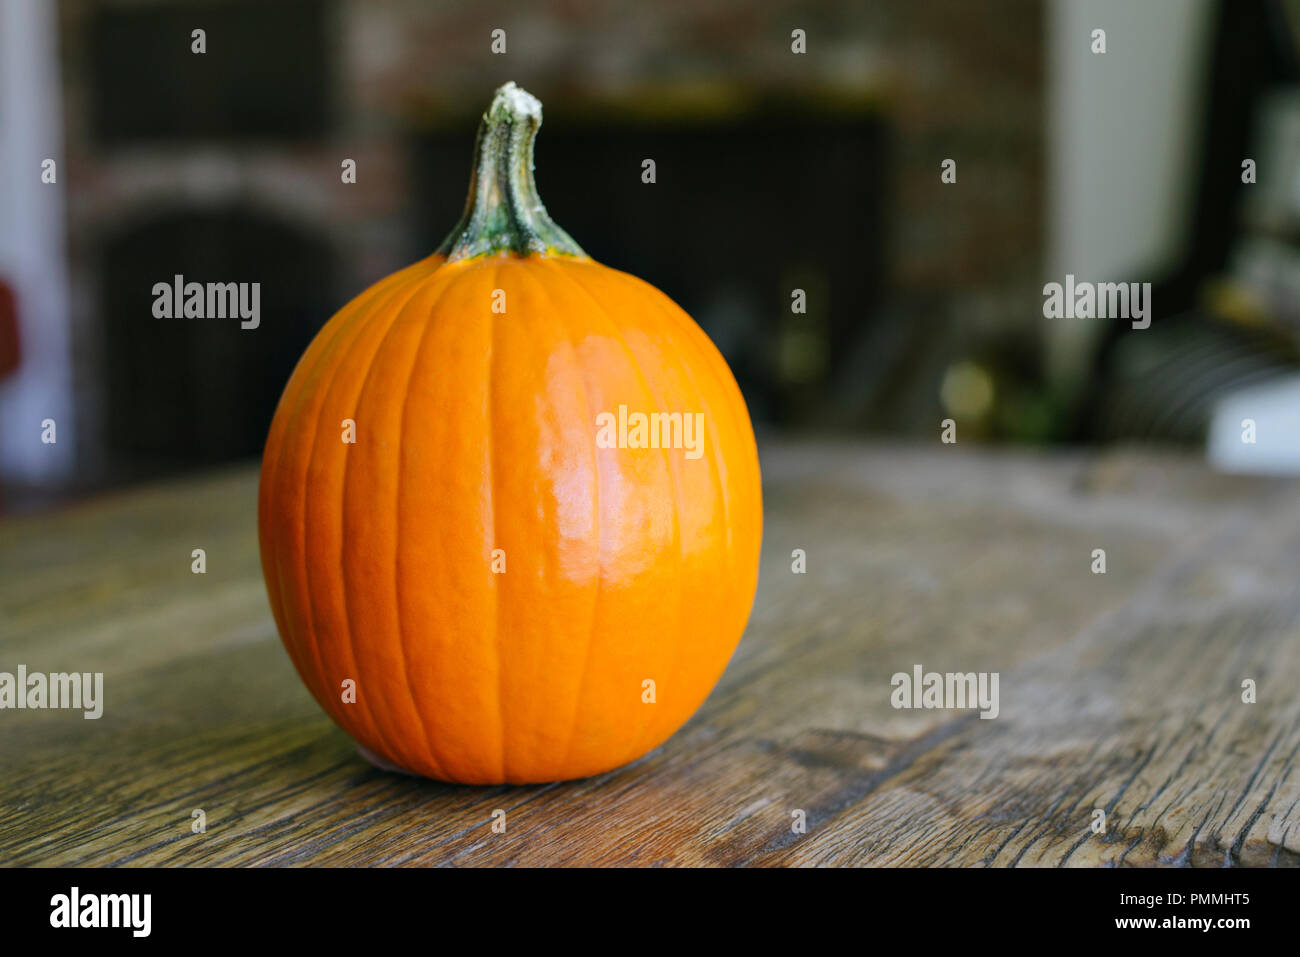 View of a small pumpkin in a home with copy space Stock Photo